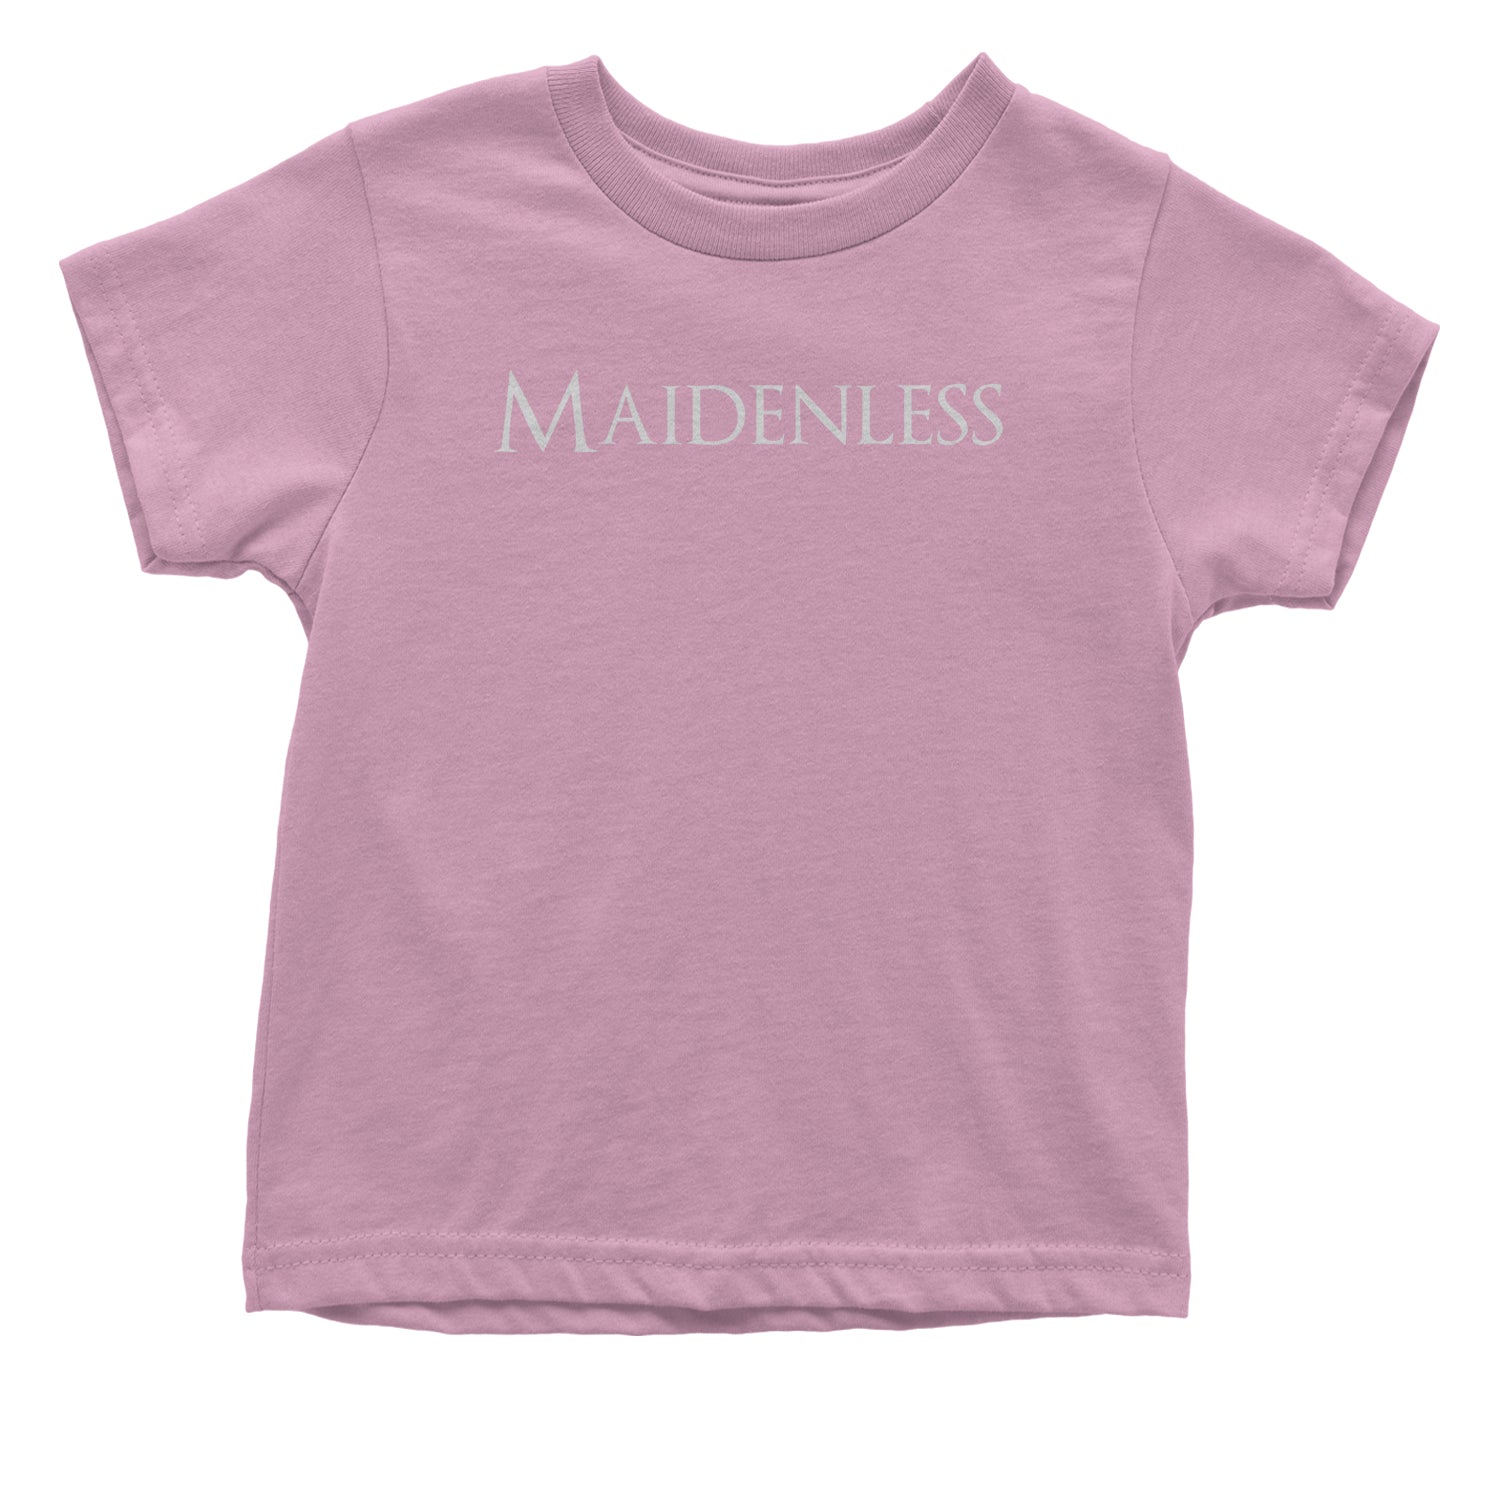 Maidenless Infant One-Piece Romper Bodysuit and Toddler T-shirt elden, game, video by Expression Tees